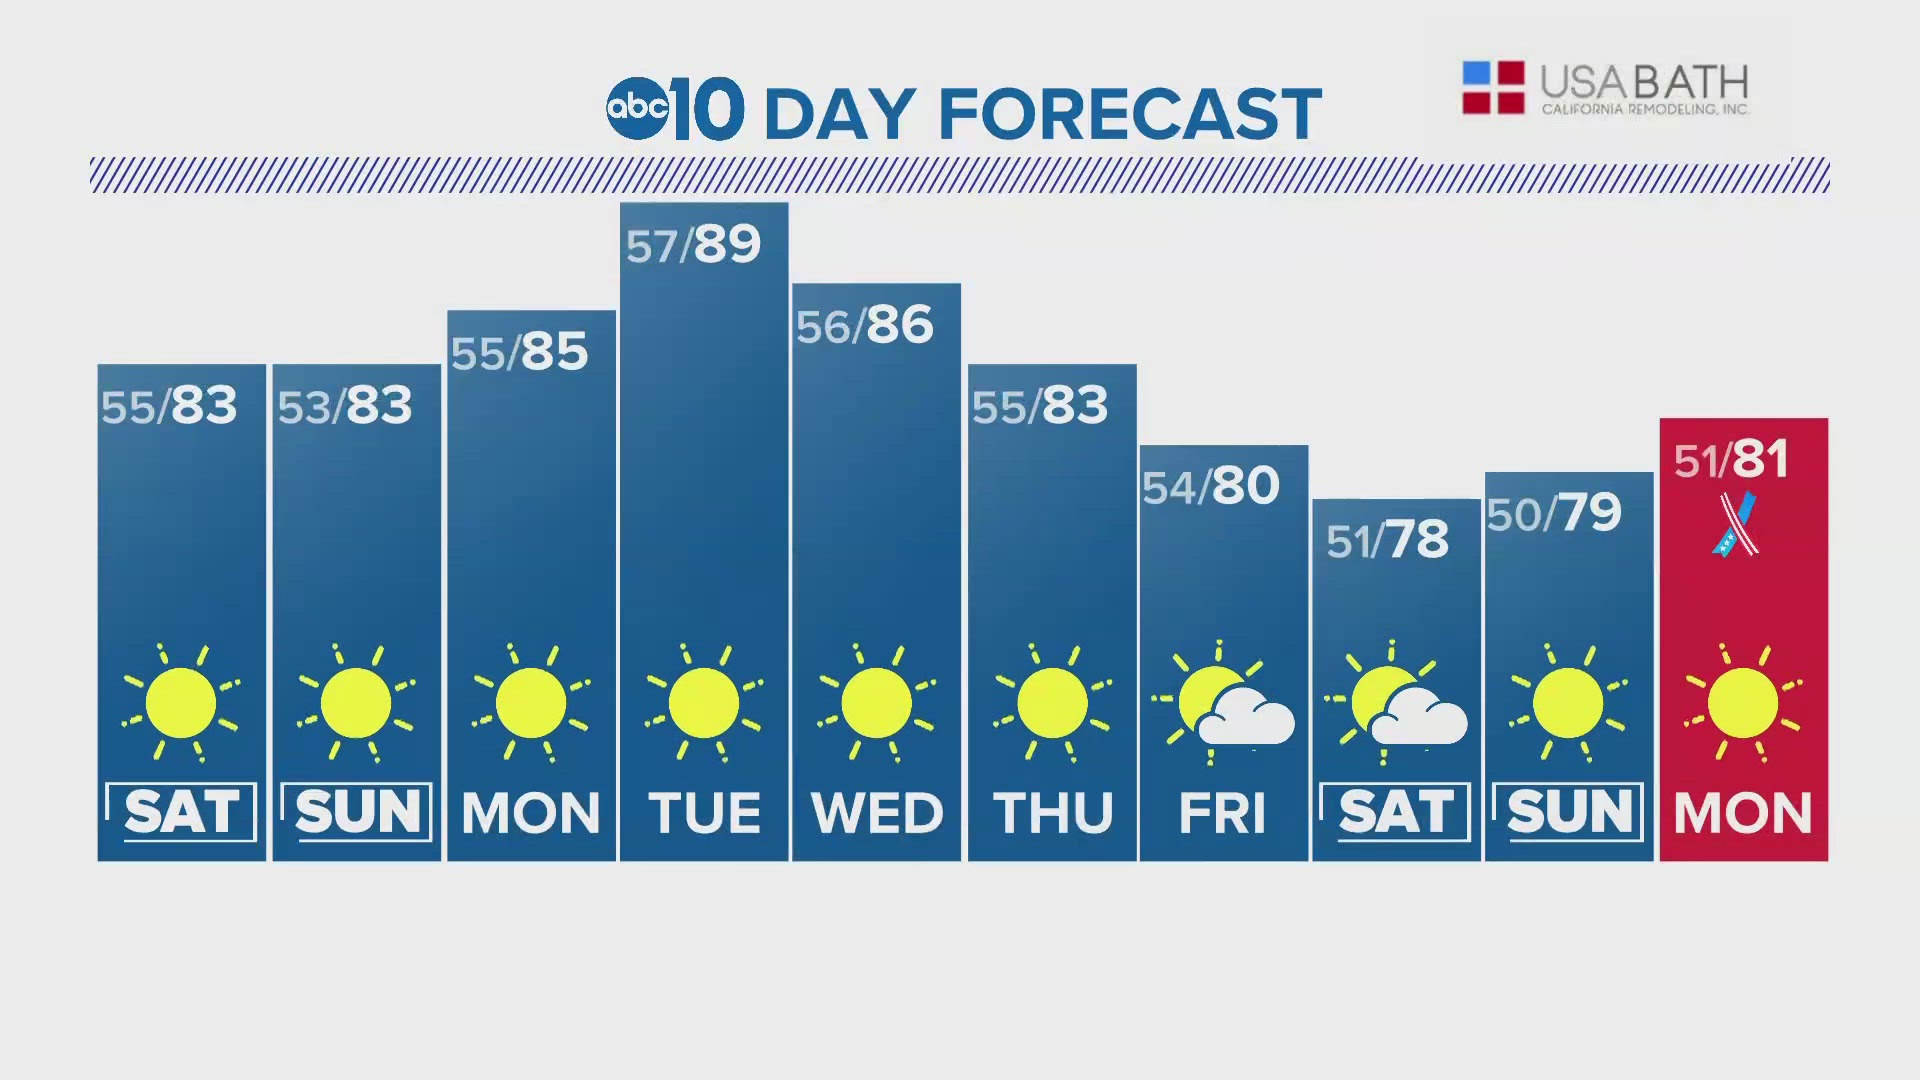 ABC10's Carley Gomez gives us a look at our 10-day forecast.